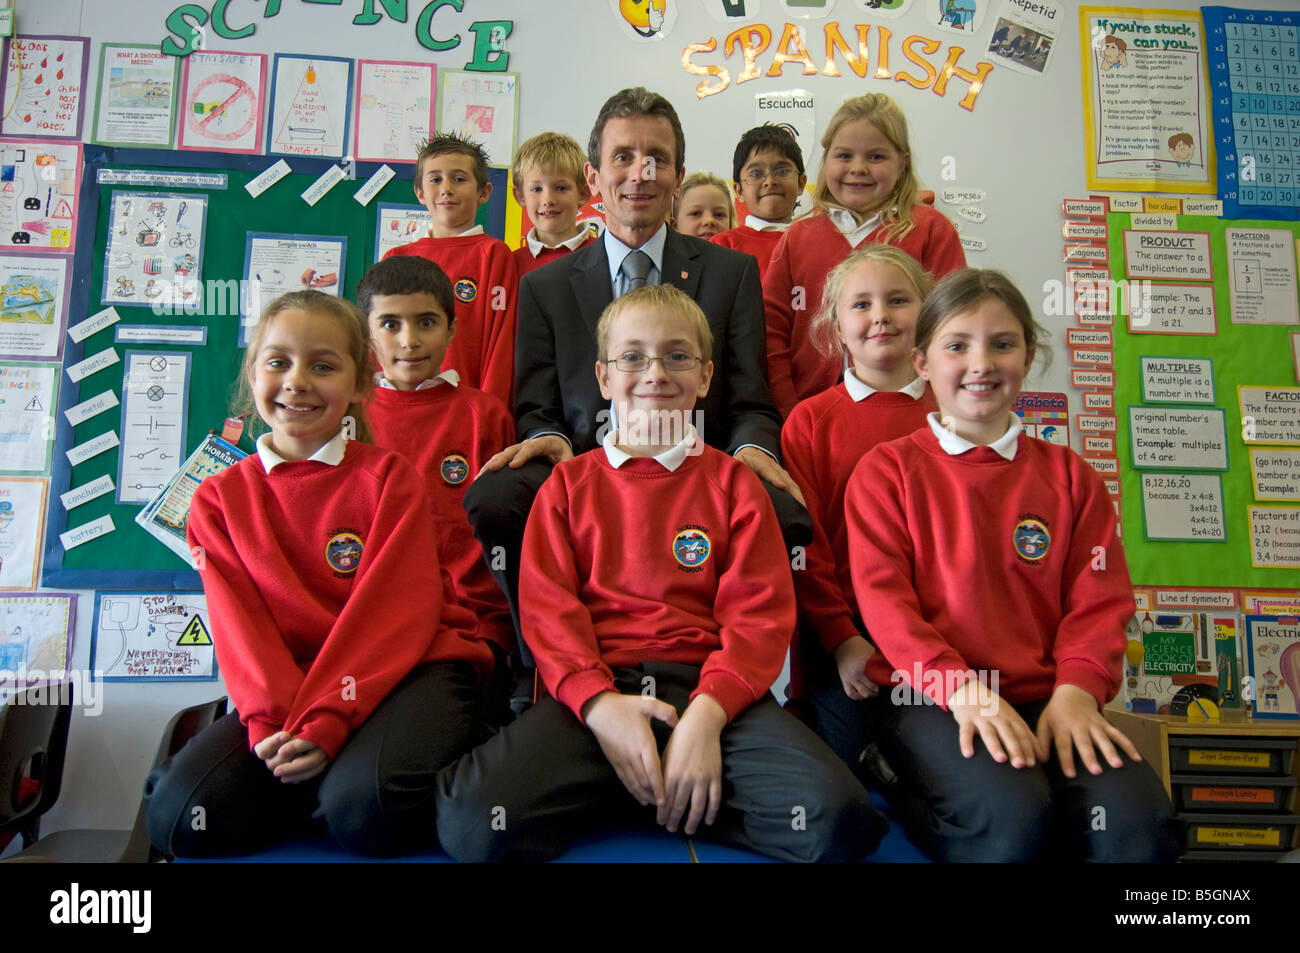 A primary school headmaster with pupils in red uniform sweatshirts in a classroom Stock Photo